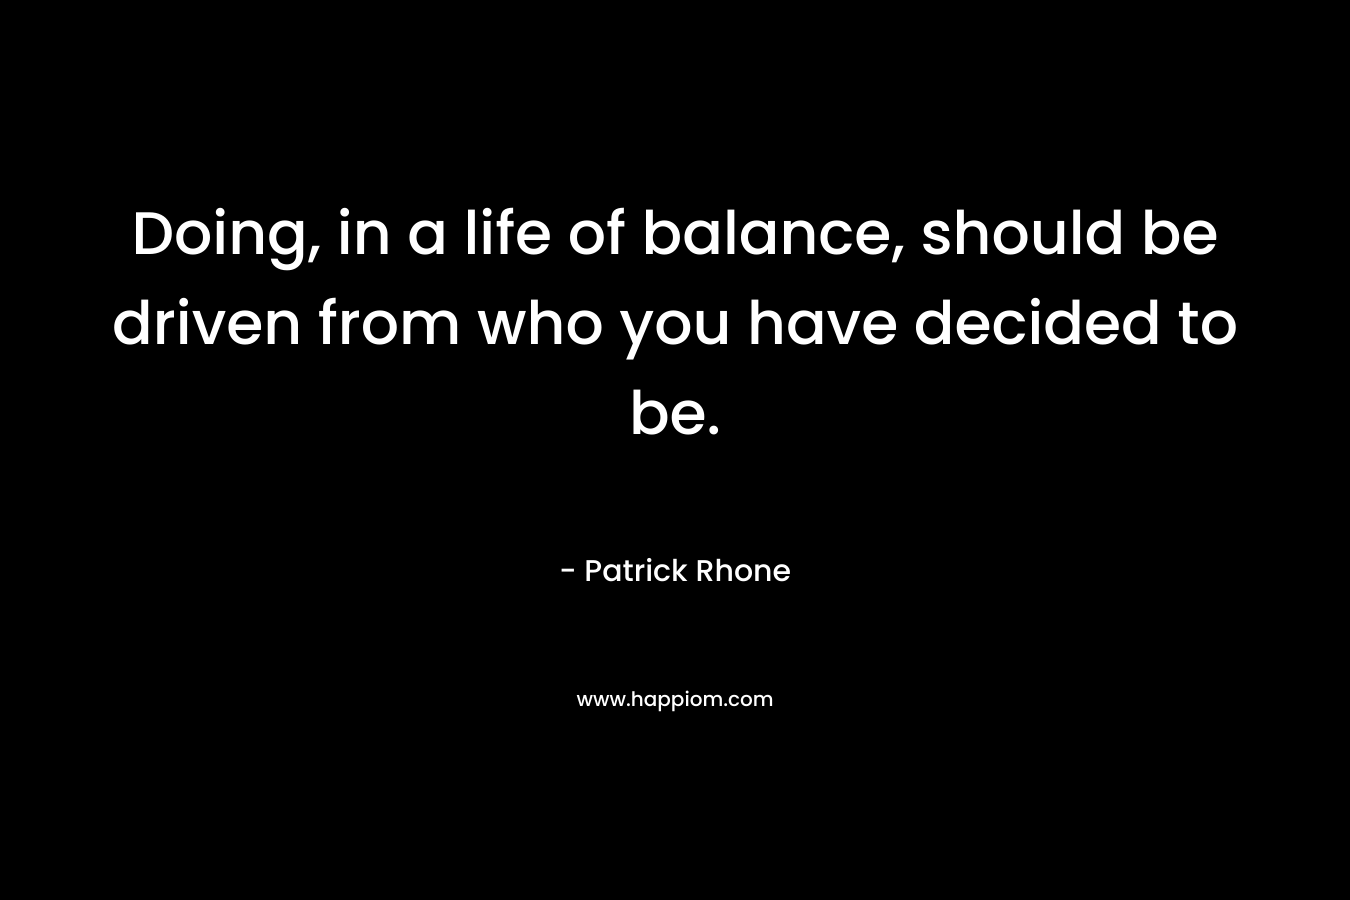 Doing, in a life of balance, should be driven from who you have decided to be.